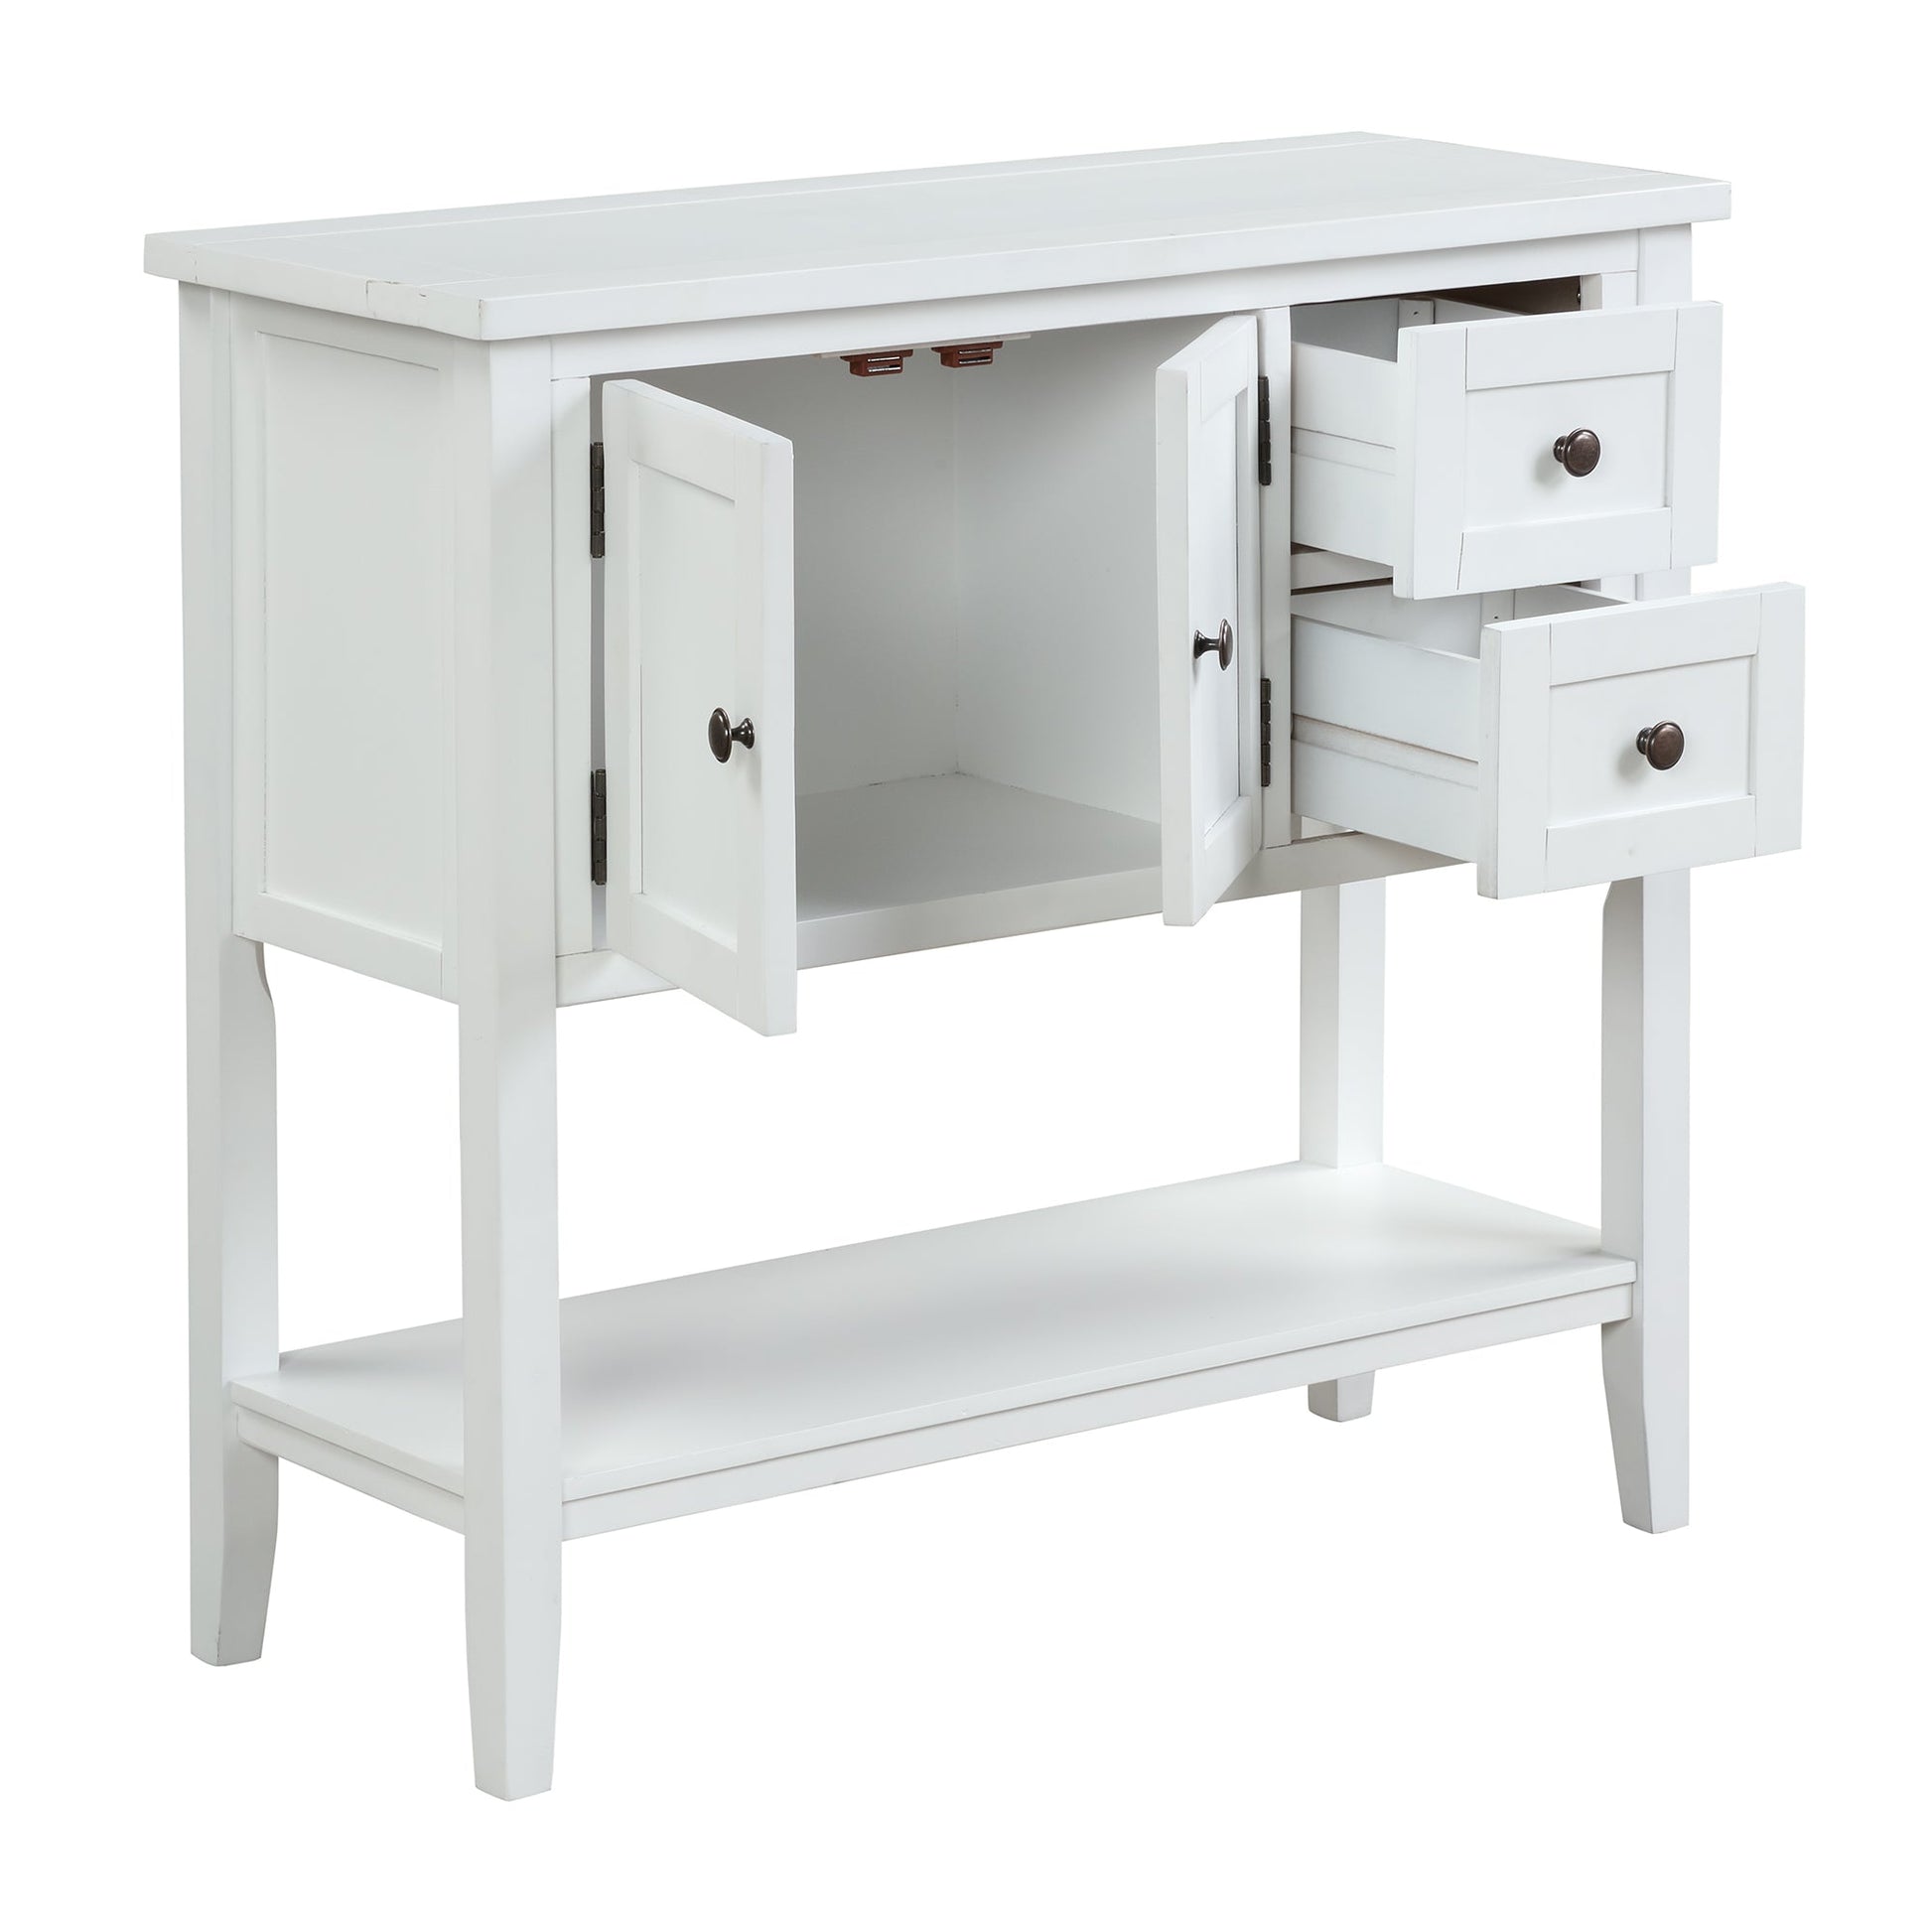 Modern Console Table with 2 Drawers, 1 Cabinet and 1 Shelf White - Demine Essentials